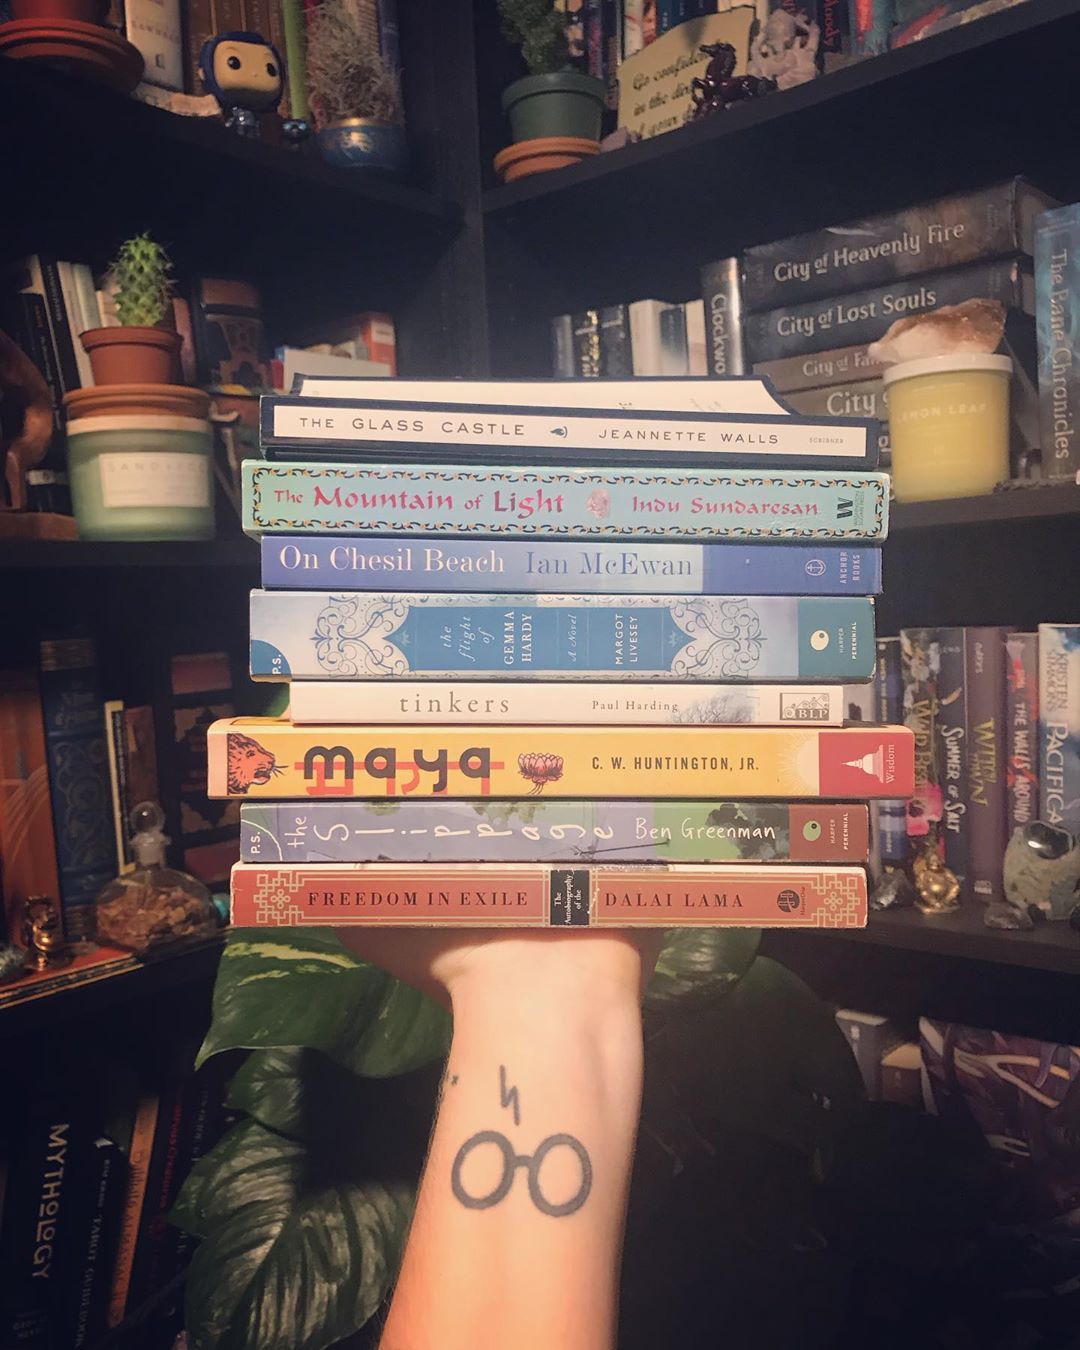 When I was in college, I got this ridiculous notion in my head that I was only allowed to read books firmly in my field of study. Despite still being a young adult, I bought only adult literary fiction. And then never read them. . As an actual adult...